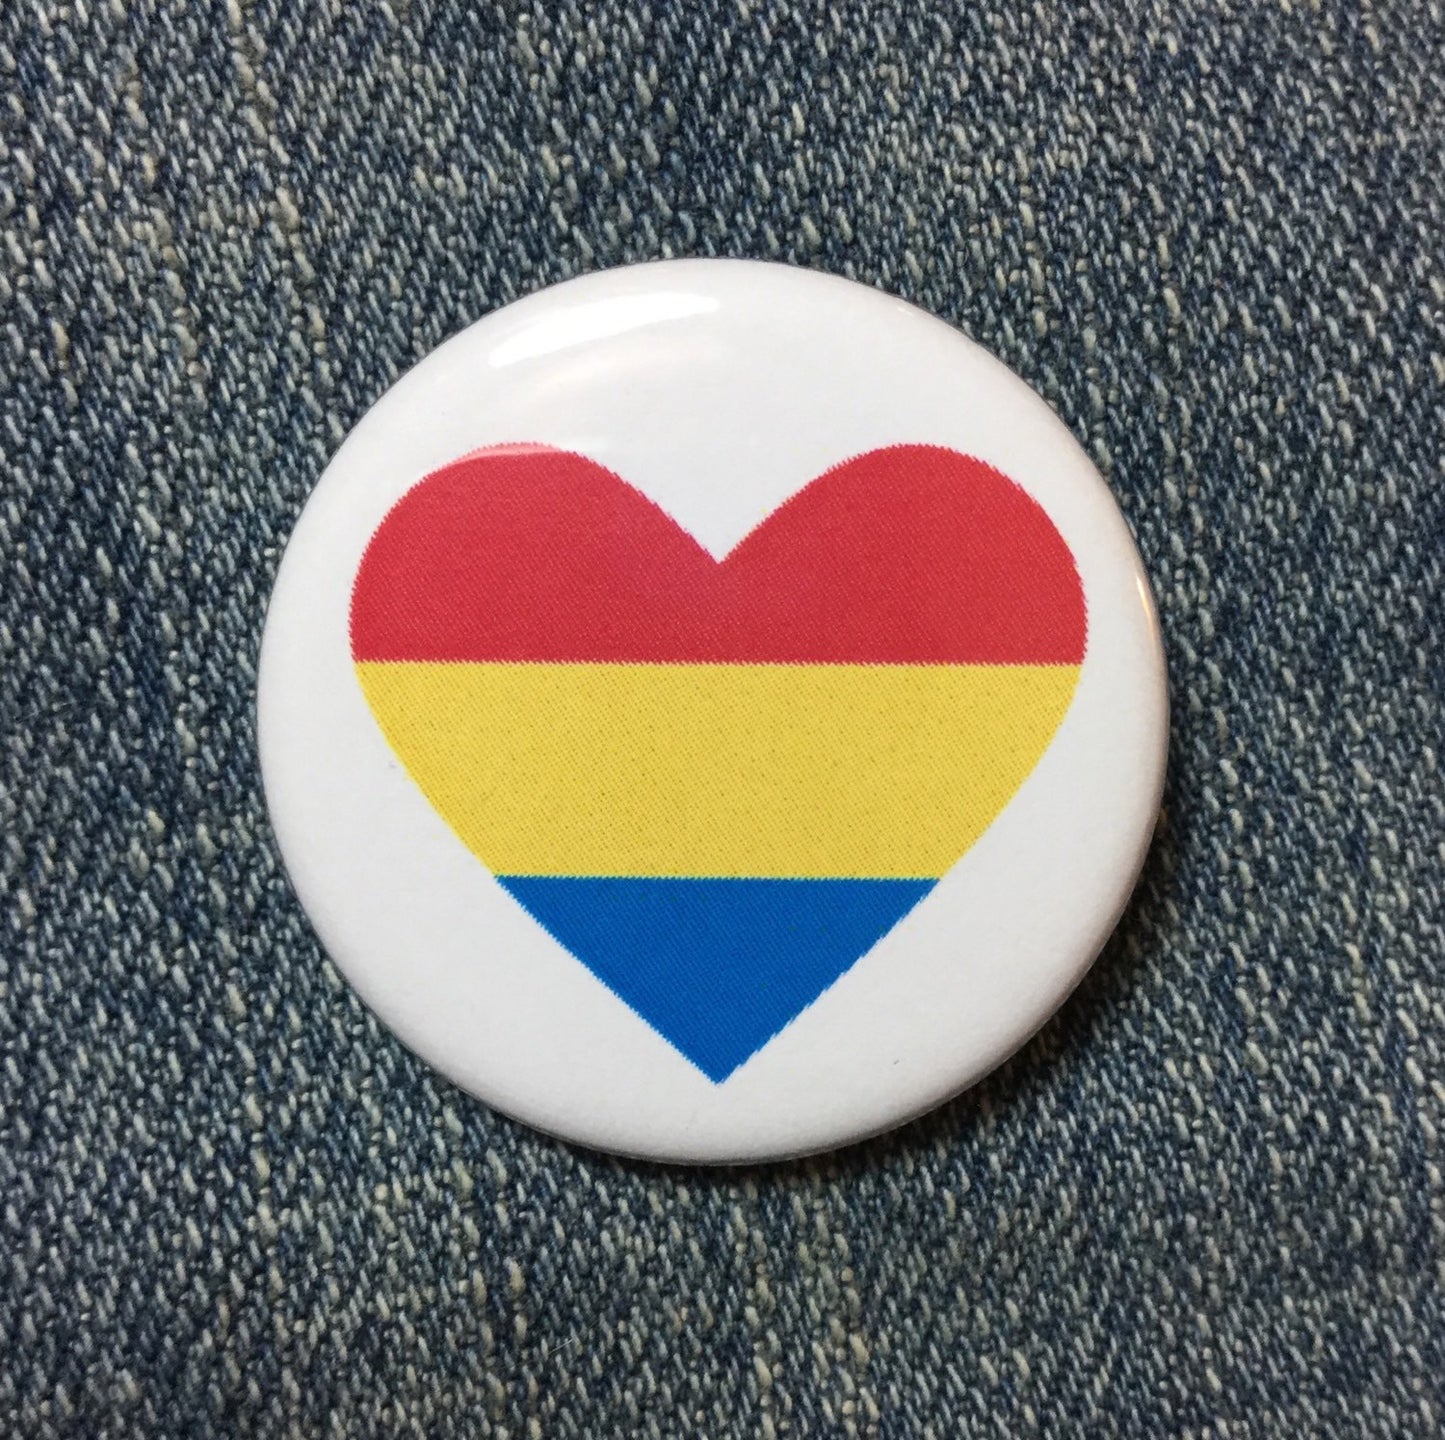 Pansexual pride button - Radical Buttons